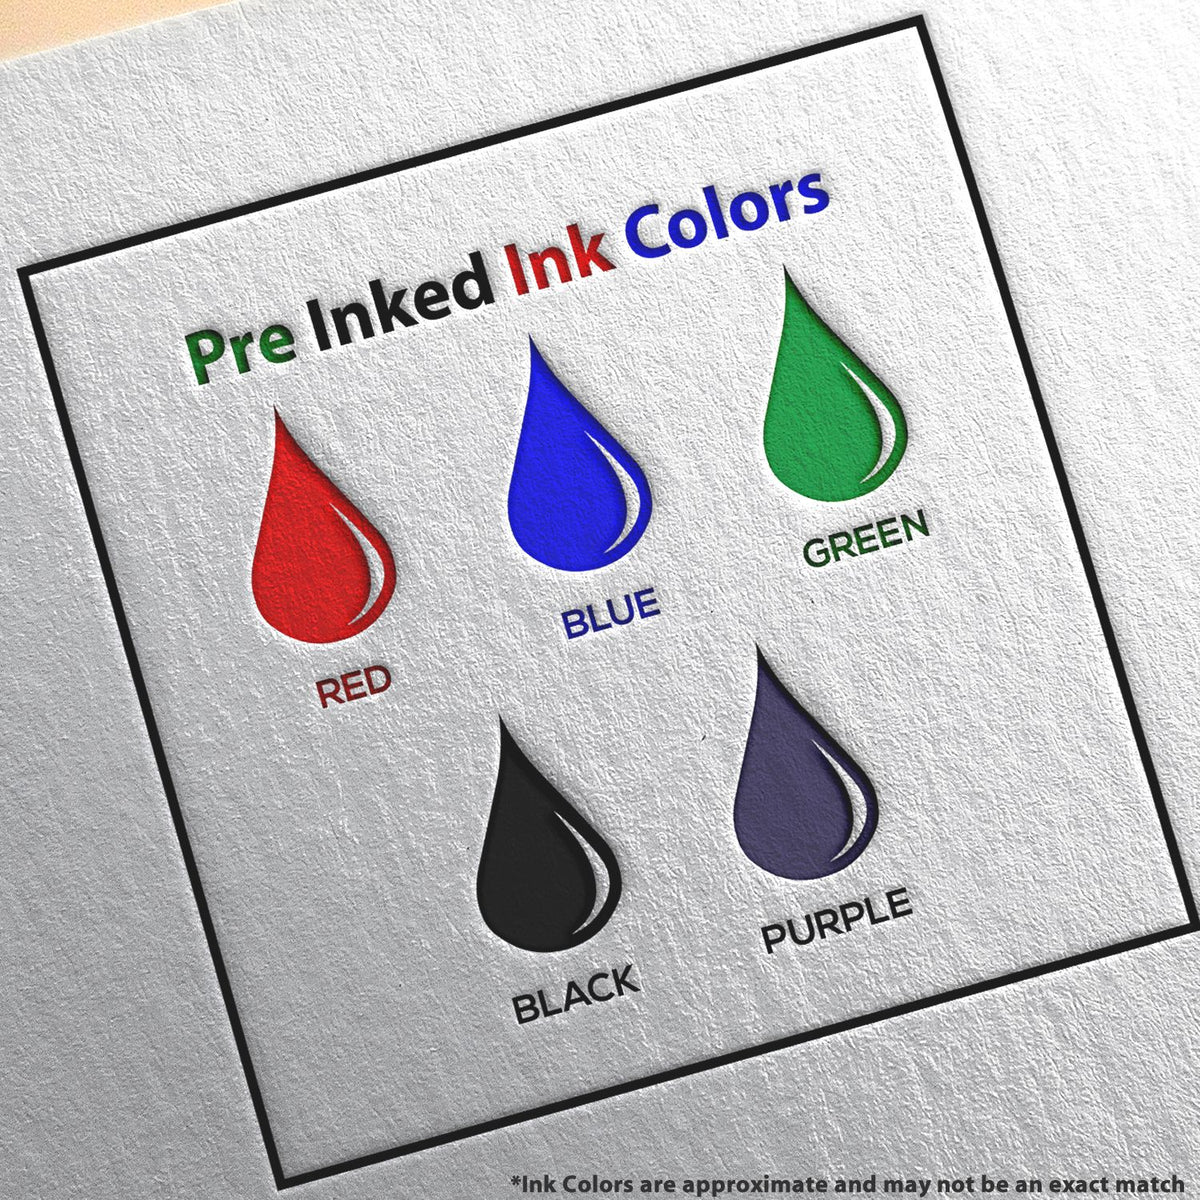 A picture showing the different ink colors or hues available for the Super Slim New York Notary Public Stamp product.